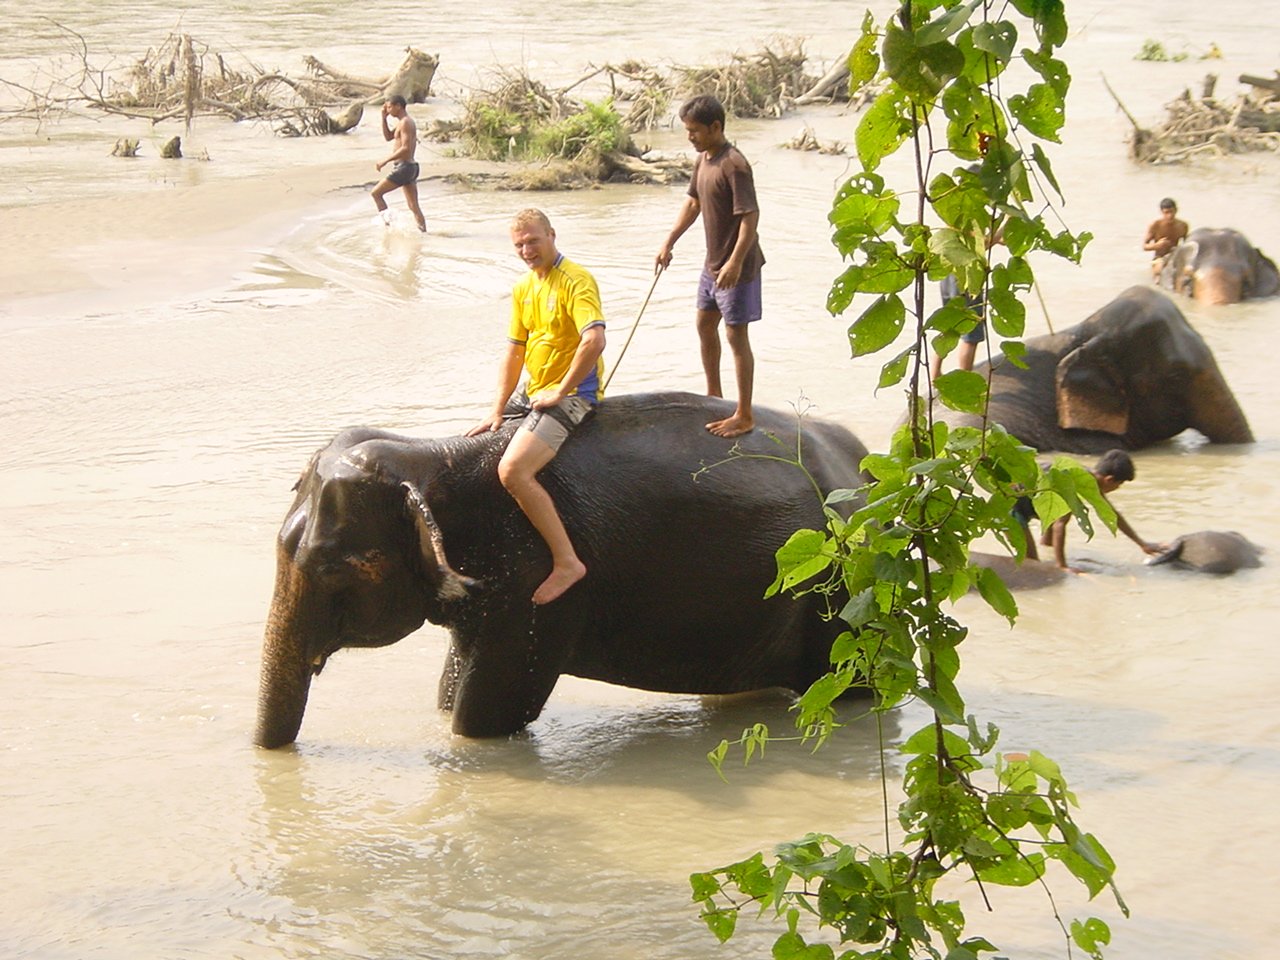  An image of elephants wading through the Rapti River in Chitwan National Park, with tourists riding on their backs. The elephants are partially submerged in the water, with only their backs and trunks visible.